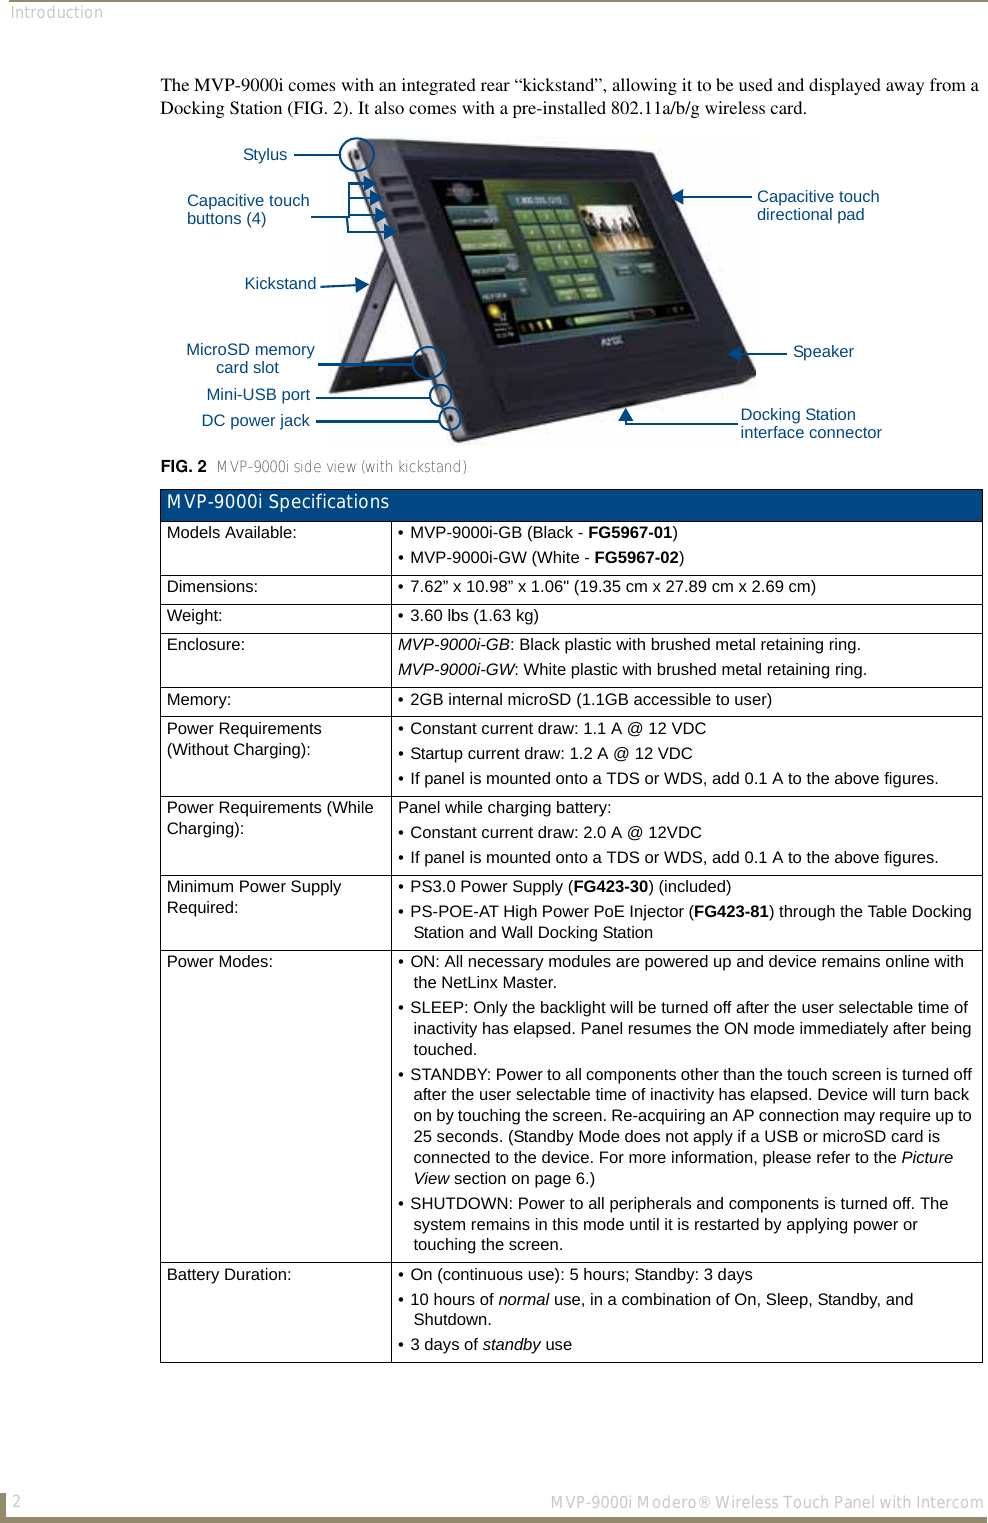 Introduction2 MVP-9000i Modero® Wireless Touch Panel with IntercomThe MVP-9000i comes with an integrated rear “kickstand”, allowing it to be used and displayed away from a Docking Station (FIG. 2). It also comes with a pre-installed 802.11a/b/g wireless card.      FIG. 2  MVP-9000i side view (with kickstand)MVP-9000i Specifications Models Available:  • MVP-9000i-GB (Black - FG5967-01)• MVP-9000i-GW (White - FG5967-02)Dimensions: • 7.62” x 10.98” x 1.06&quot; (19.35 cm x 27.89 cm x 2.69 cm)Weight: • 3.60 lbs (1.63 kg)Enclosure: MVP-9000i-GB: Black plastic with brushed metal retaining ring.MVP-9000i-GW: White plastic with brushed metal retaining ring.Memory: • 2GB internal microSD (1.1GB accessible to user)Power Requirements(Without Charging):• Constant current draw: 1.1 A @ 12 VDC• Startup current draw: 1.2 A @ 12 VDC• If panel is mounted onto a TDS or WDS, add 0.1 A to the above figures.Power Requirements (While Charging):Panel while charging battery:• Constant current draw: 2.0 A @ 12VDC• If panel is mounted onto a TDS or WDS, add 0.1 A to the above figures.Minimum Power Supply Required:• PS3.0 Power Supply (FG423-30) (included)• PS-POE-AT High Power PoE Injector (FG423-81) through the Table Docking Station and Wall Docking StationPower Modes: • ON: All necessary modules are powered up and device remains online with the NetLinx Master.• SLEEP: Only the backlight will be turned off after the user selectable time of inactivity has elapsed. Panel resumes the ON mode immediately after being touched.• STANDBY: Power to all components other than the touch screen is turned off after the user selectable time of inactivity has elapsed. Device will turn back on by touching the screen. Re-acquiring an AP connection may require up to 25 seconds. (Standby Mode does not apply if a USB or microSD card is connected to the device. For more information, please refer to the Picture View section on page 6.)• SHUTDOWN: Power to all peripherals and components is turned off. The system remains in this mode until it is restarted by applying power or touching the screen.Battery Duration: • On (continuous use): 5 hours; Standby: 3 days • 10 hours of normal use, in a combination of On, Sleep, Standby, and Shutdown.• 3 days of standby useKickstandMini-USB portDC power jackMicroSD memorycard slotDocking Stationinterface connectorStylusSpeakerCapacitive touchCapacitive touchbuttons (4) directional pad